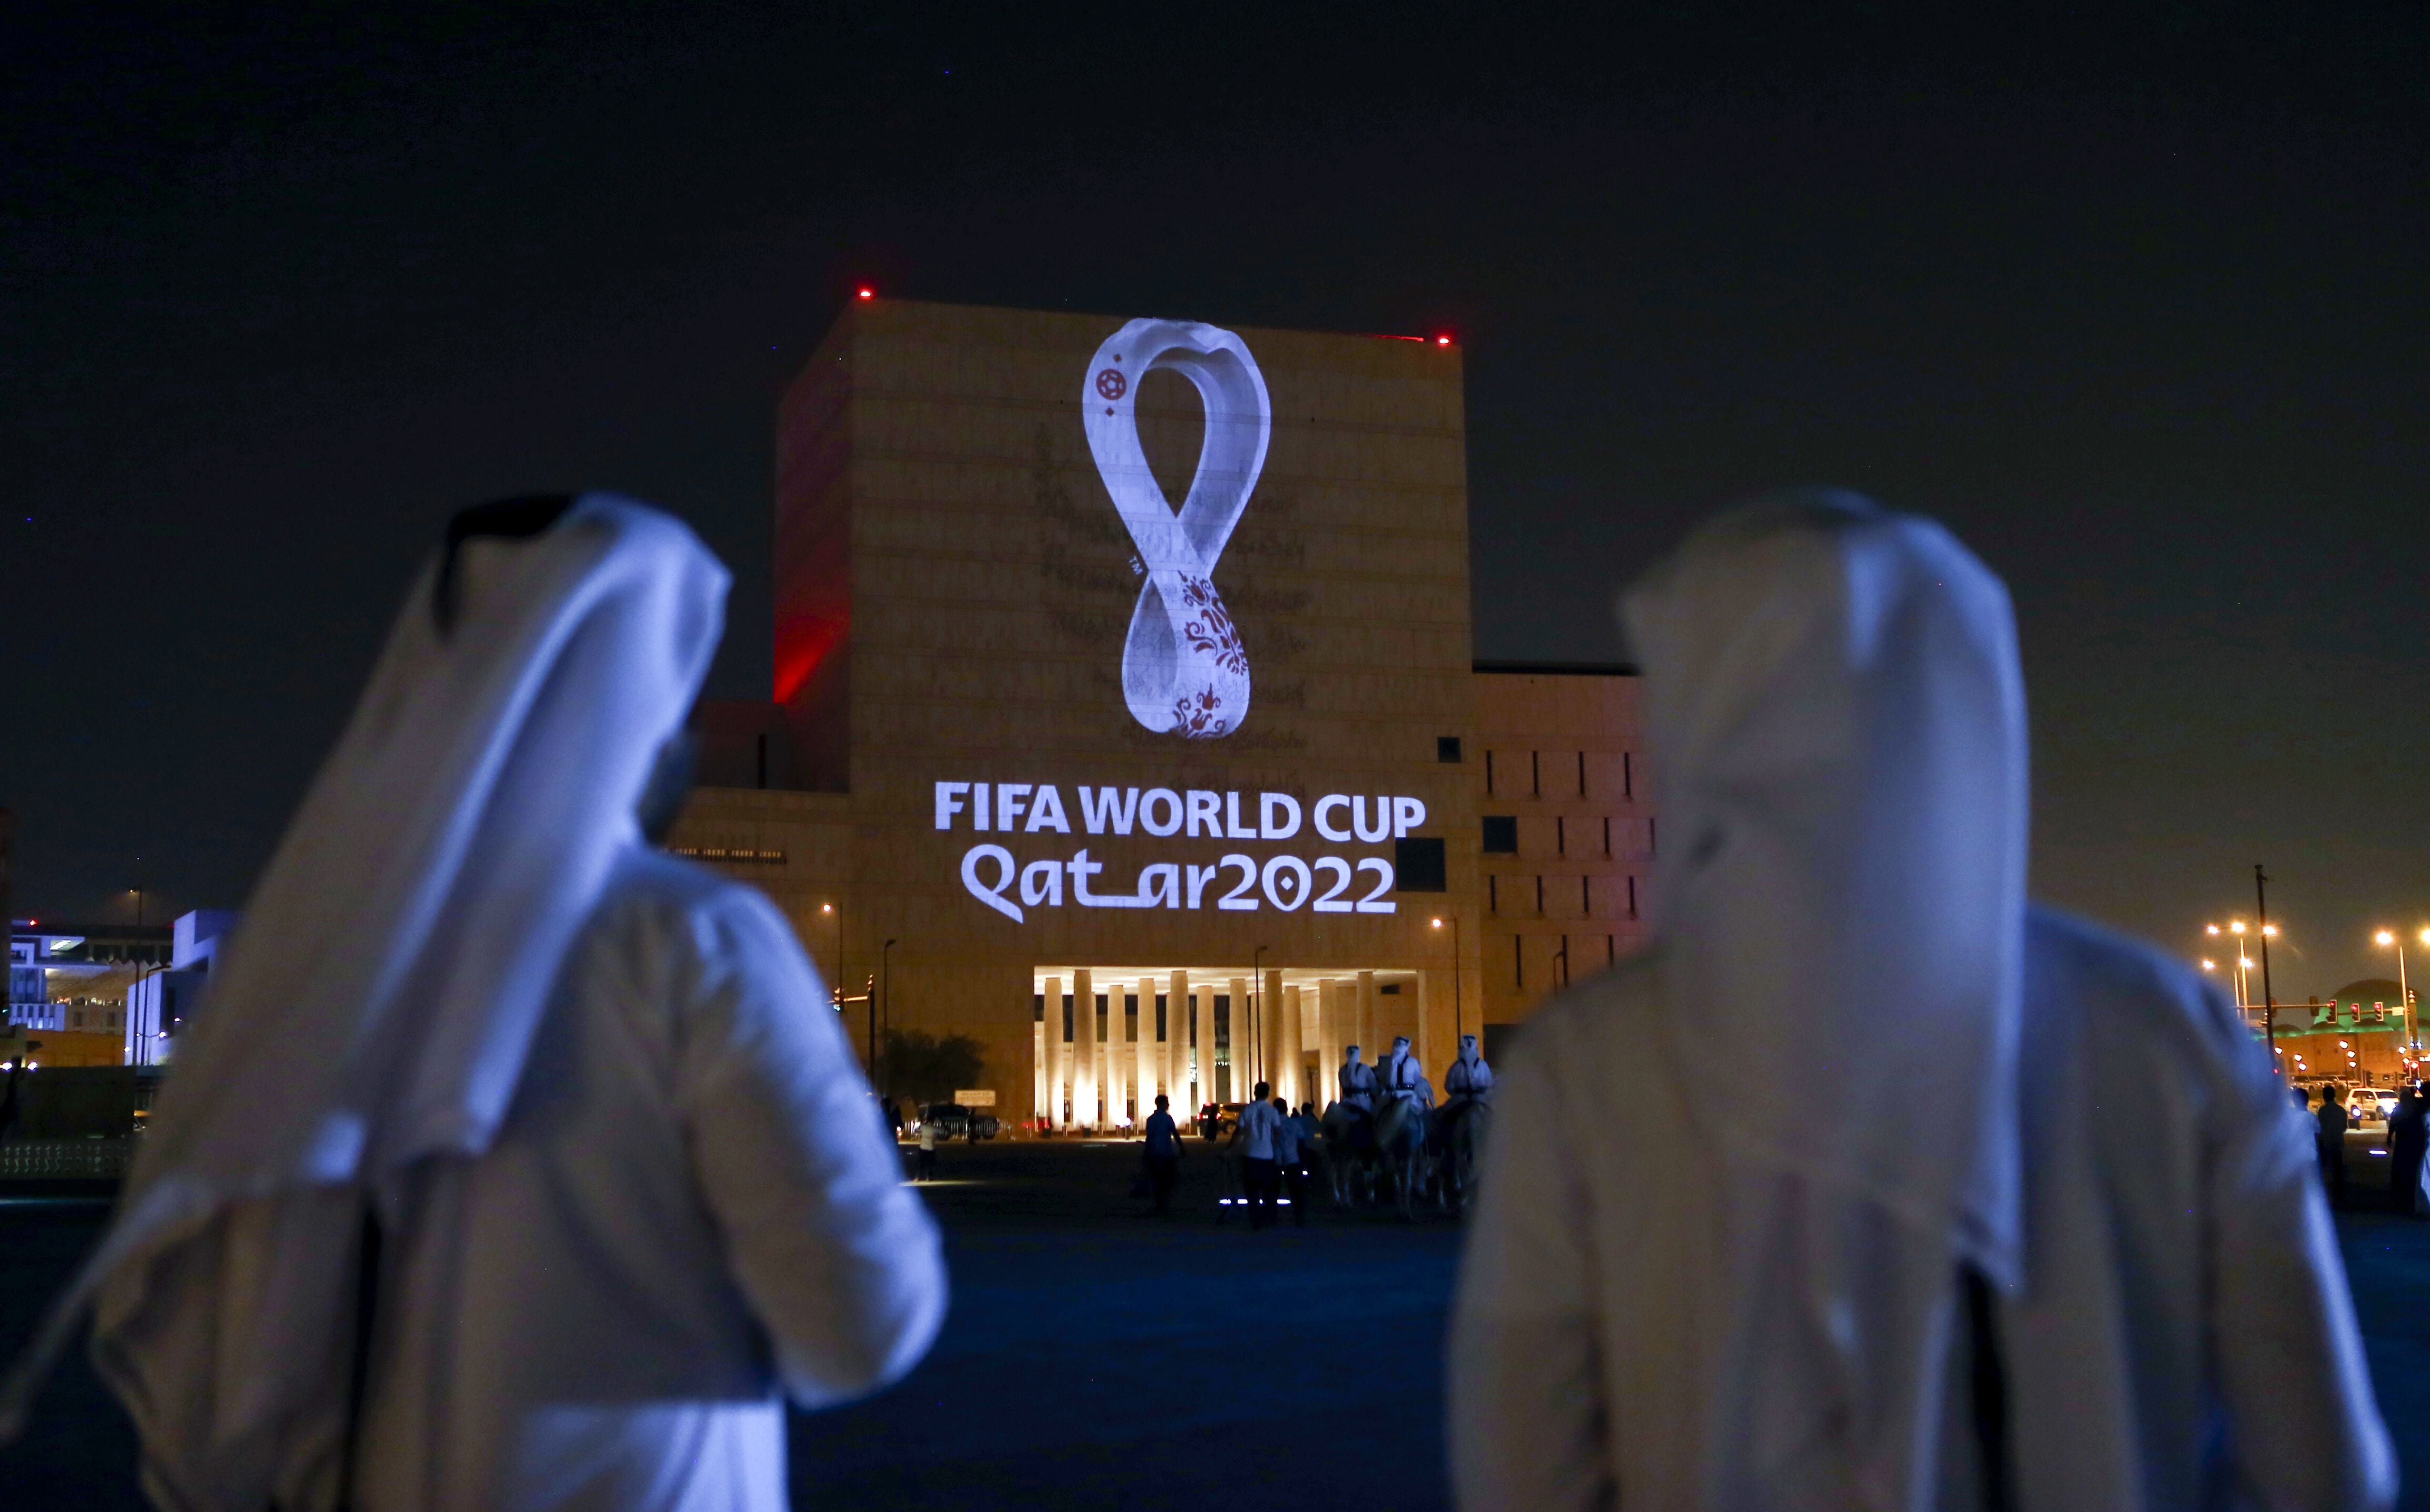 The Qatar World Cup is set to be a controversial one given the alleged human rights abuses